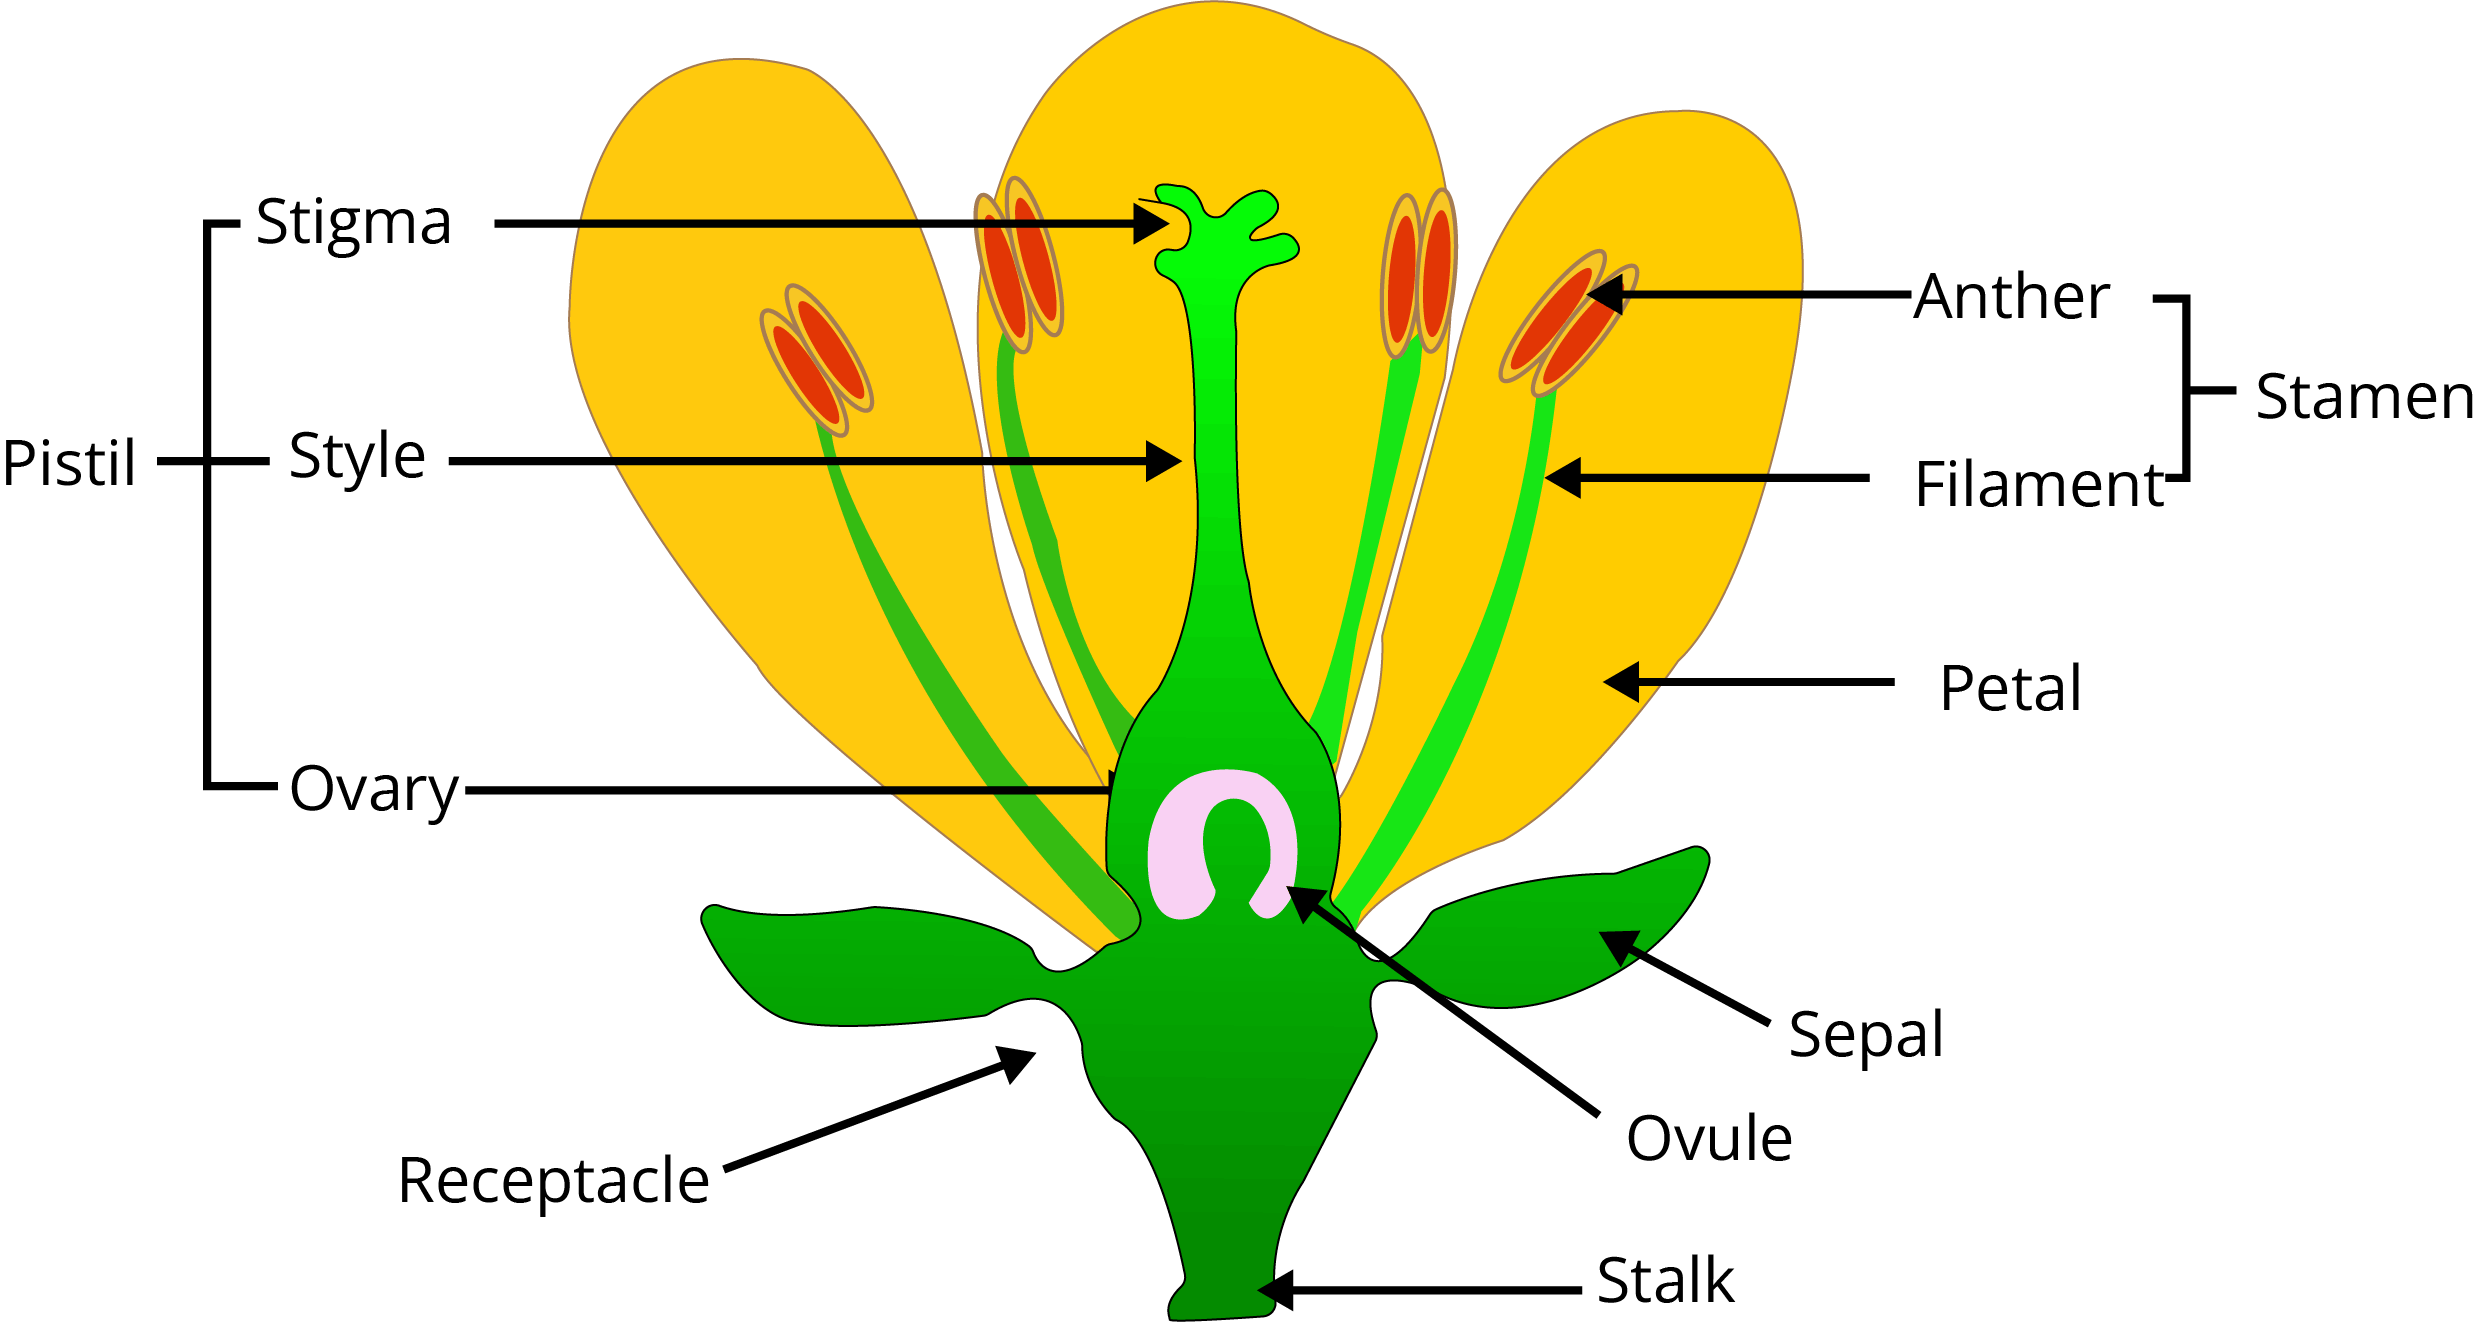 Different Parts of the Flower